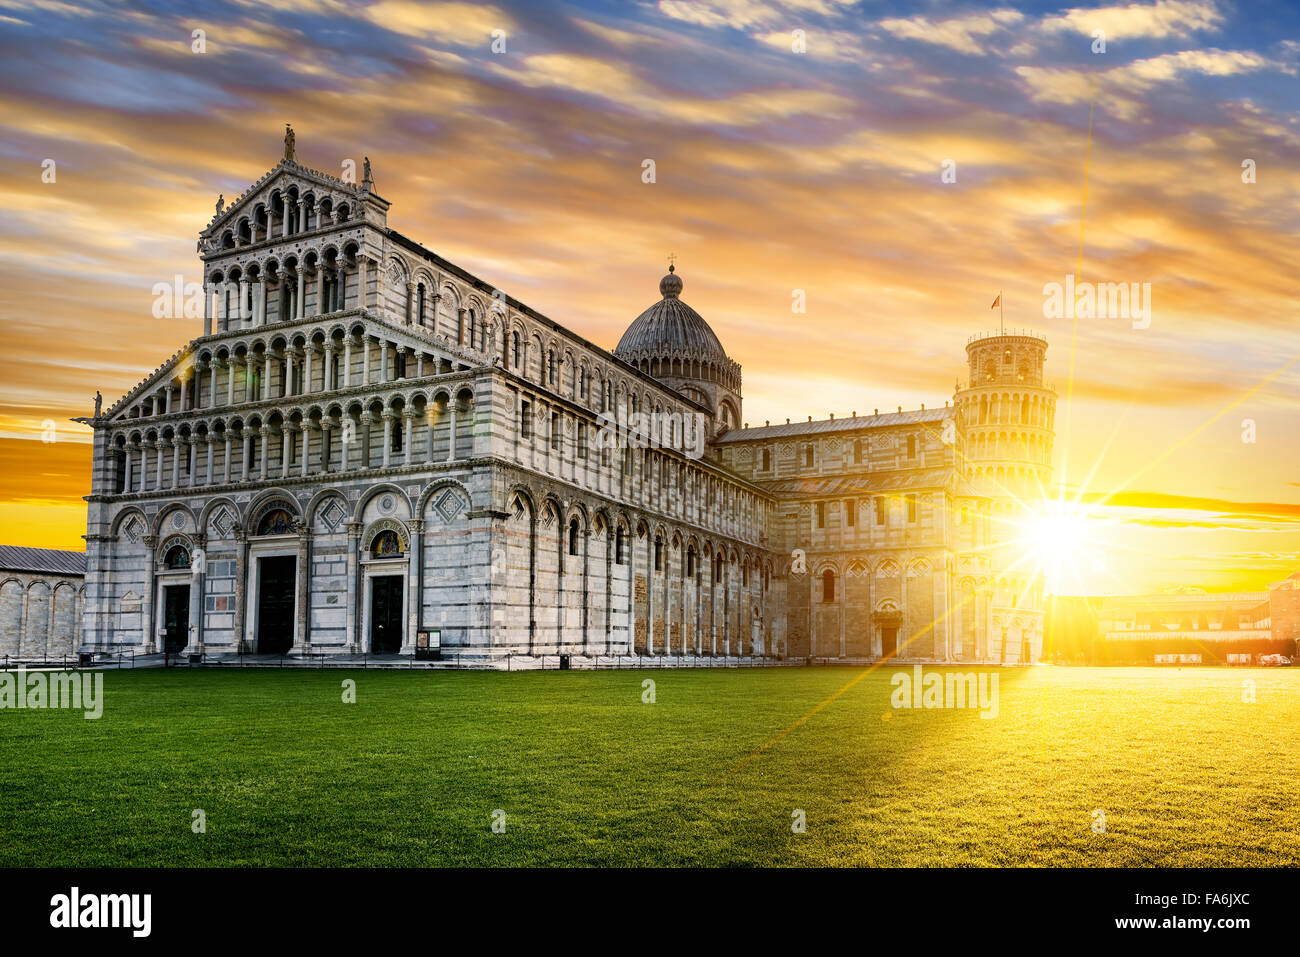 Piazza dei Miracoli complex with the leaning tower of Pisa in front, Italy Stock Photo